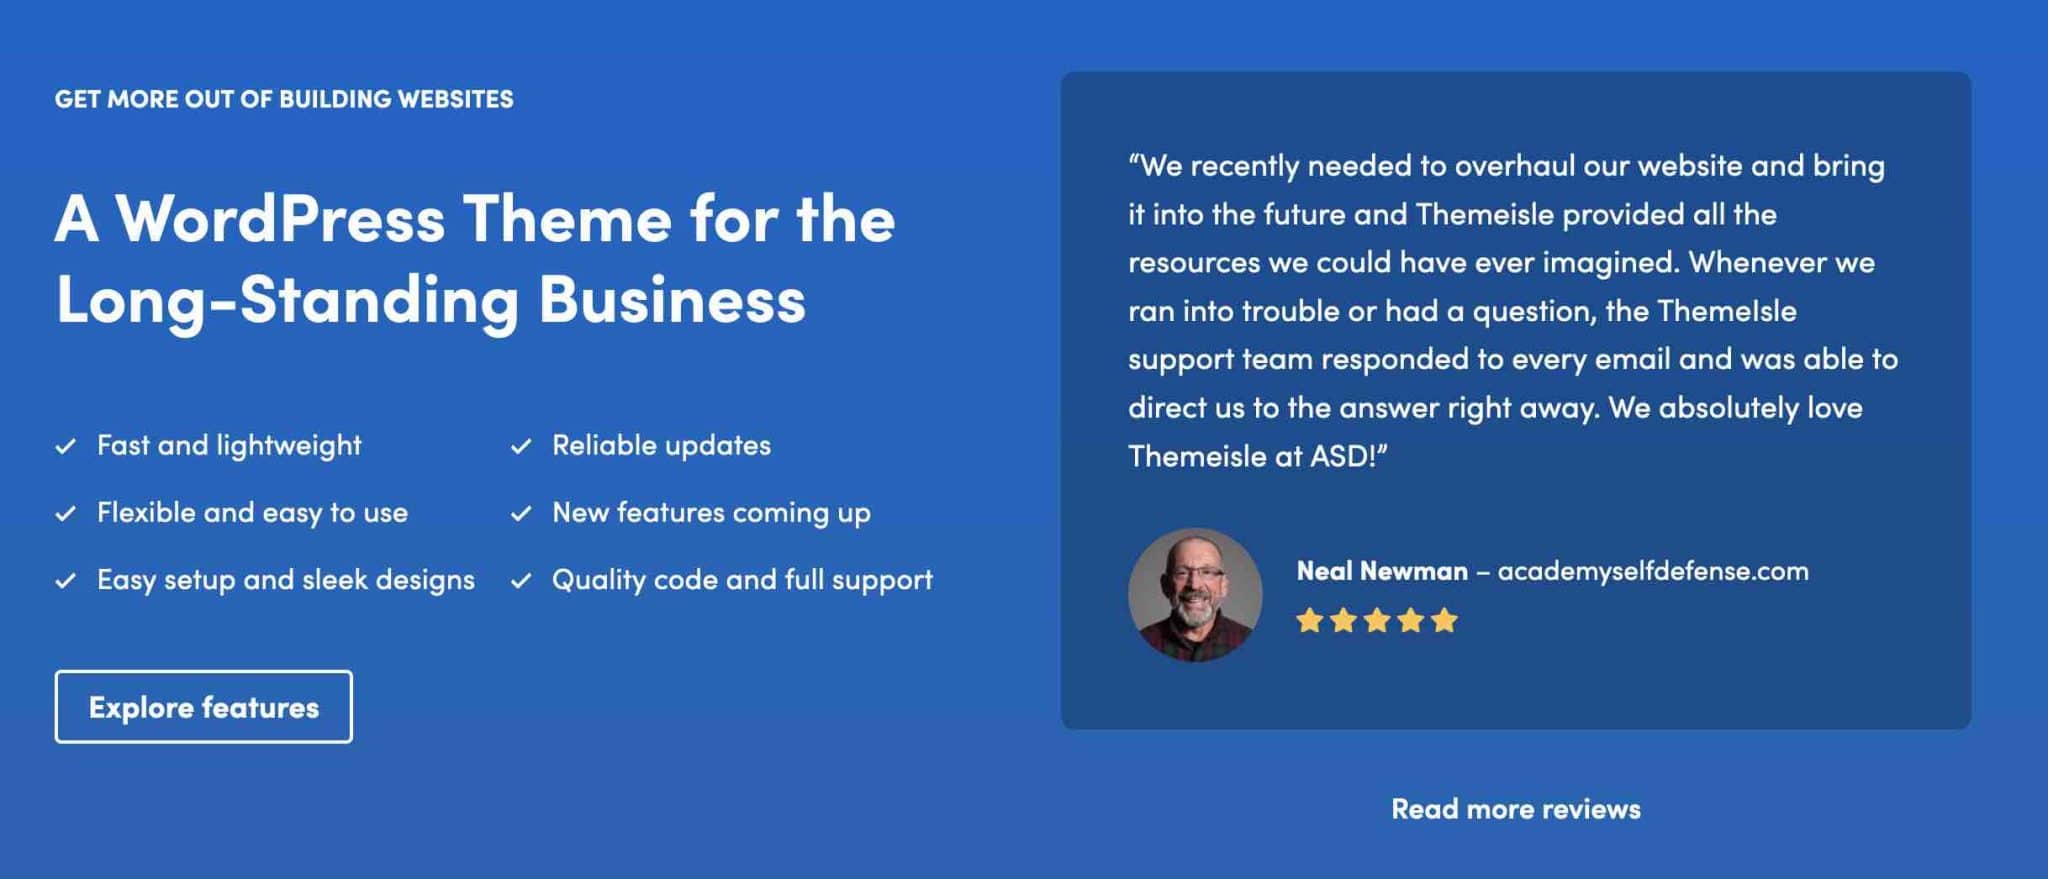 The Neve theme features WordPress customer reviews.